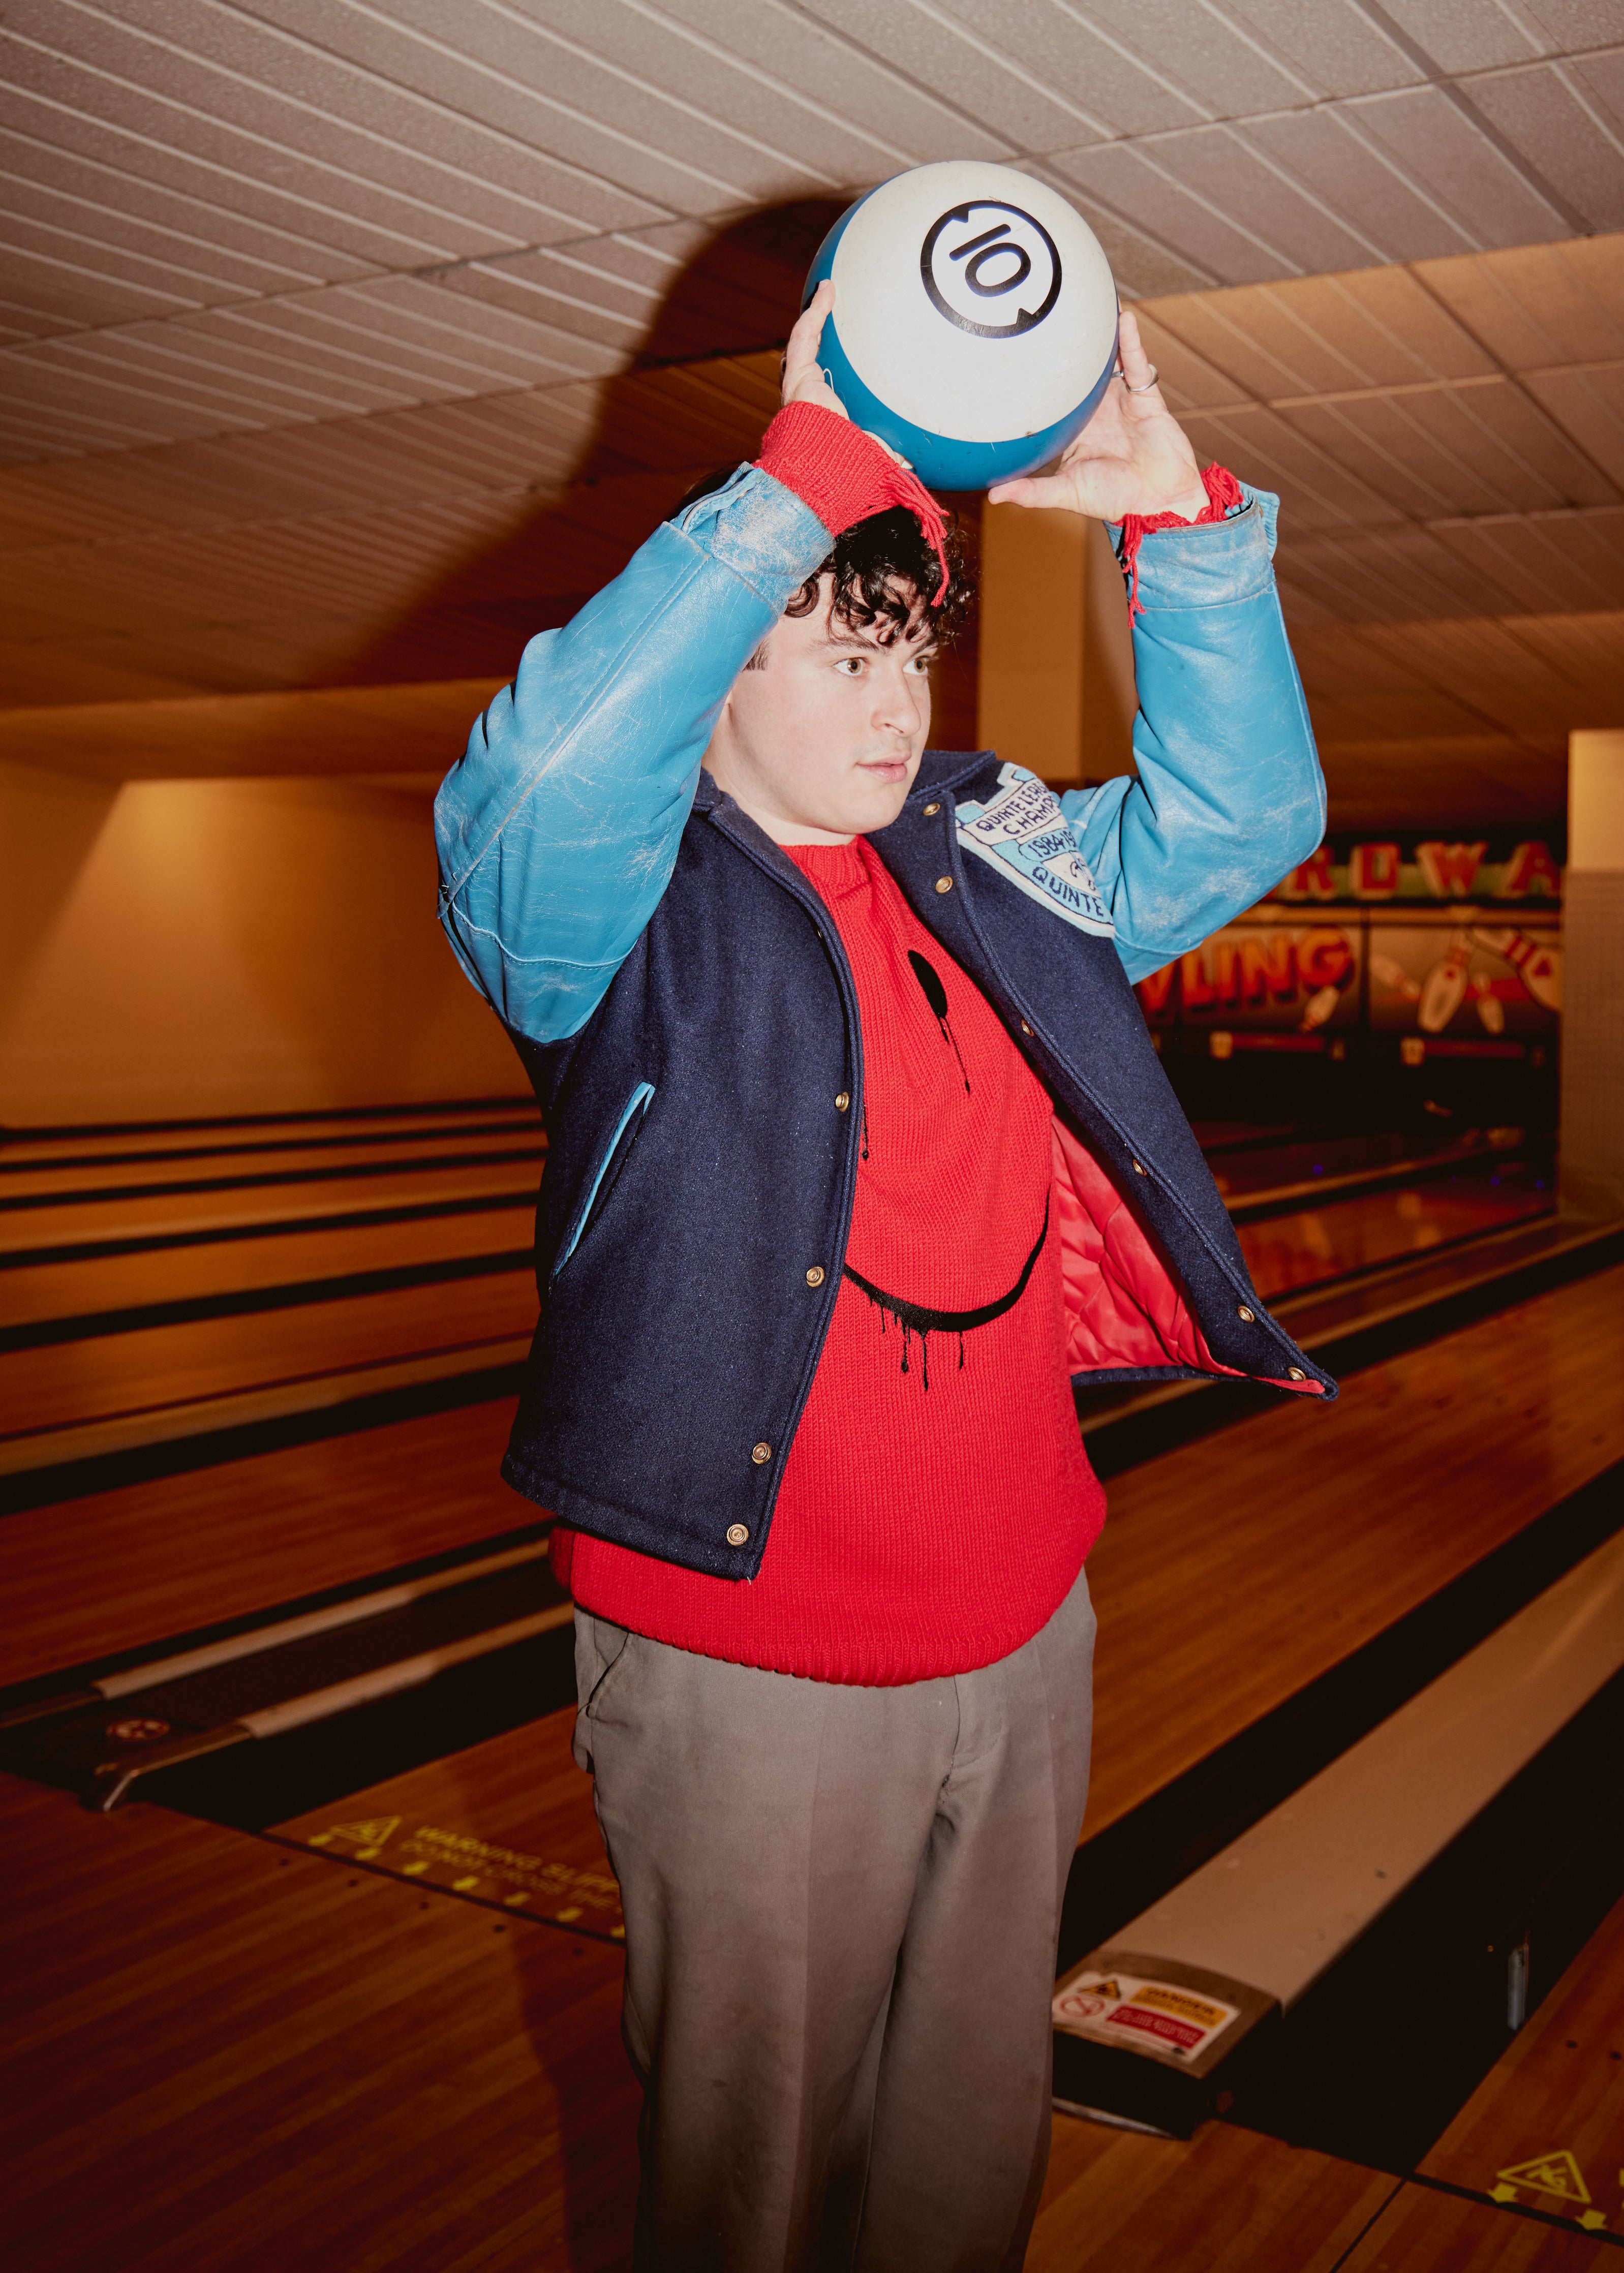 Dan from KAWALA is wearing a Stuff Maker x Smiley embroidered sweater holding a bowling ball above his head.